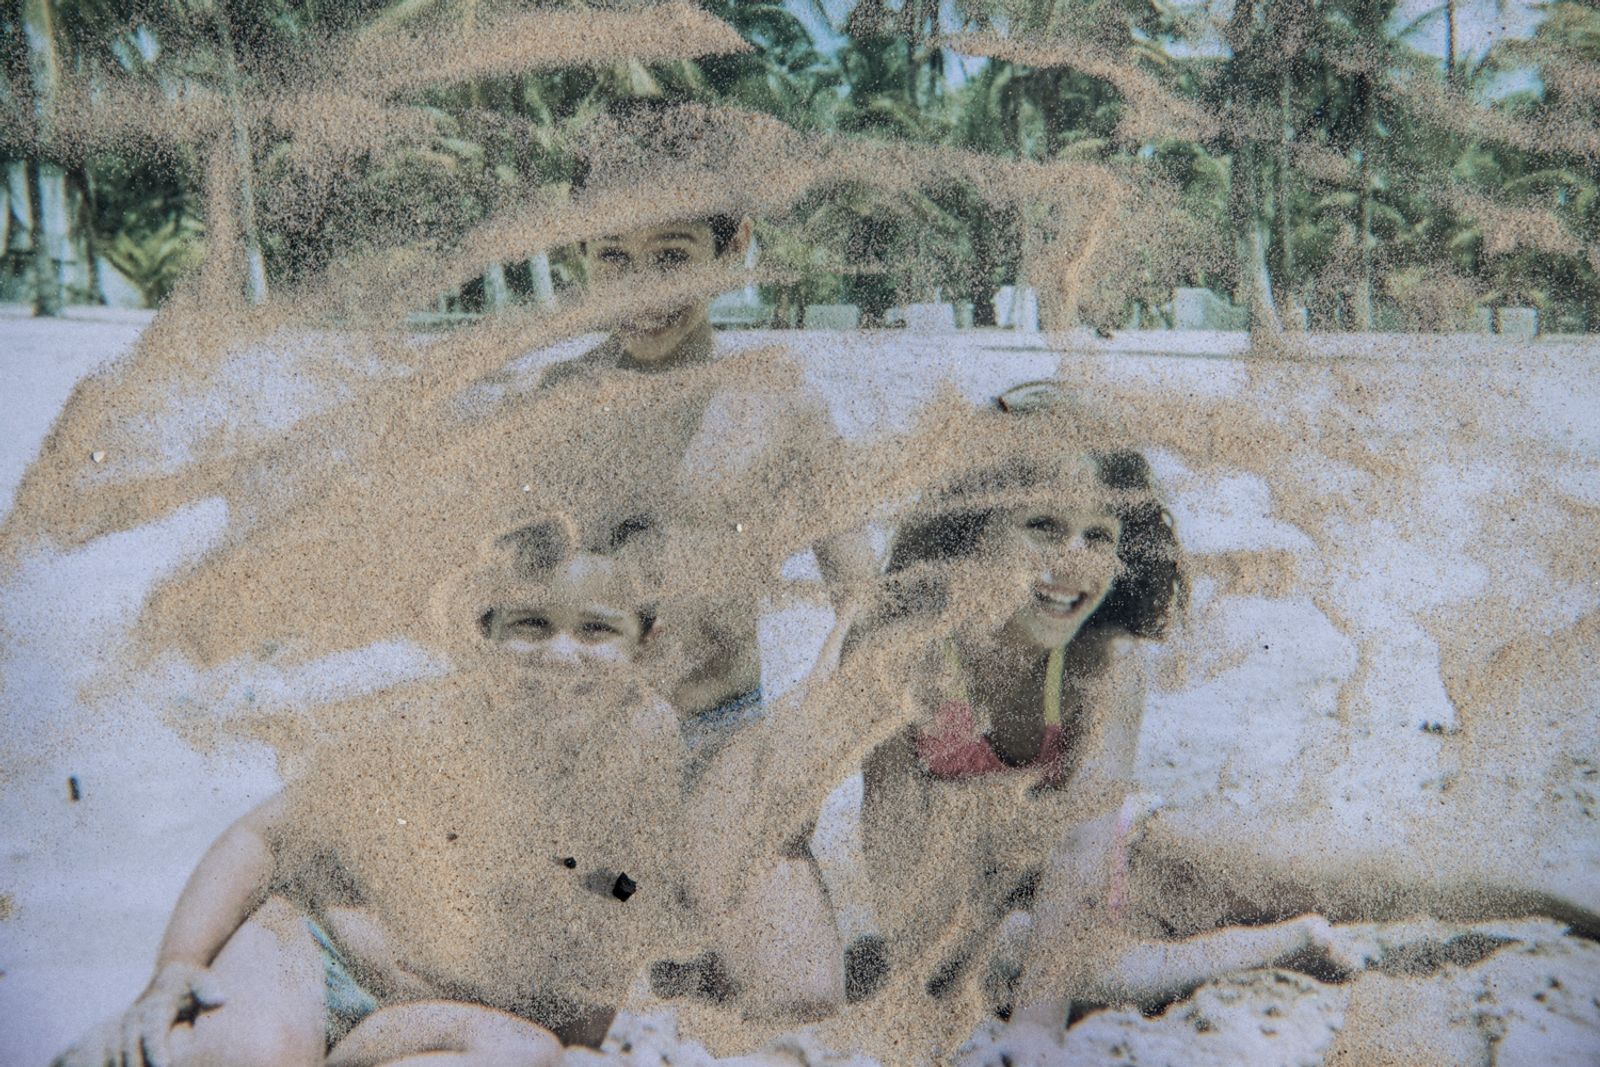 © Fabiola Ferrero - An old image of me and my brothers intervened with sand of the same beach where it was taken, Machurucuto, in Venezuela.